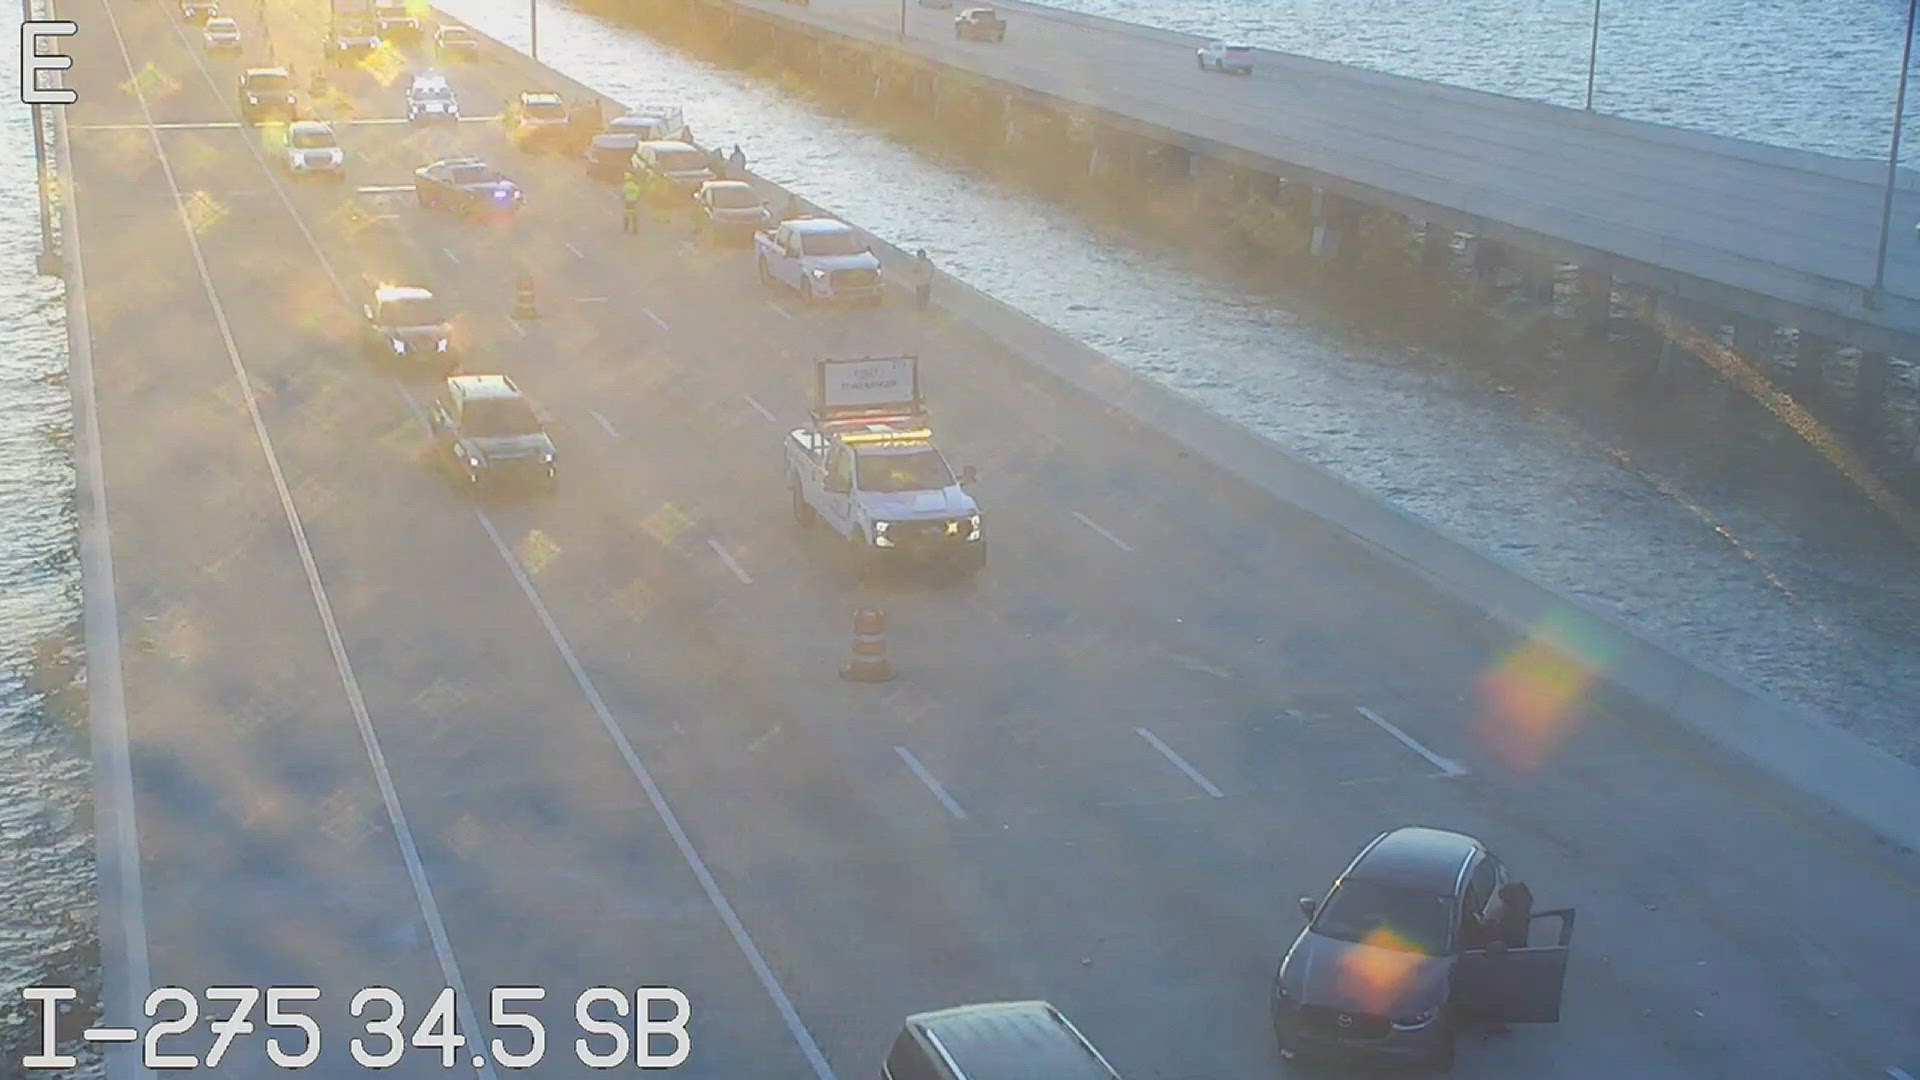 A multi-car crash on the Howard Frankland Bridge caused major delays Friday morning for commuters heading toward St. Petersburg.